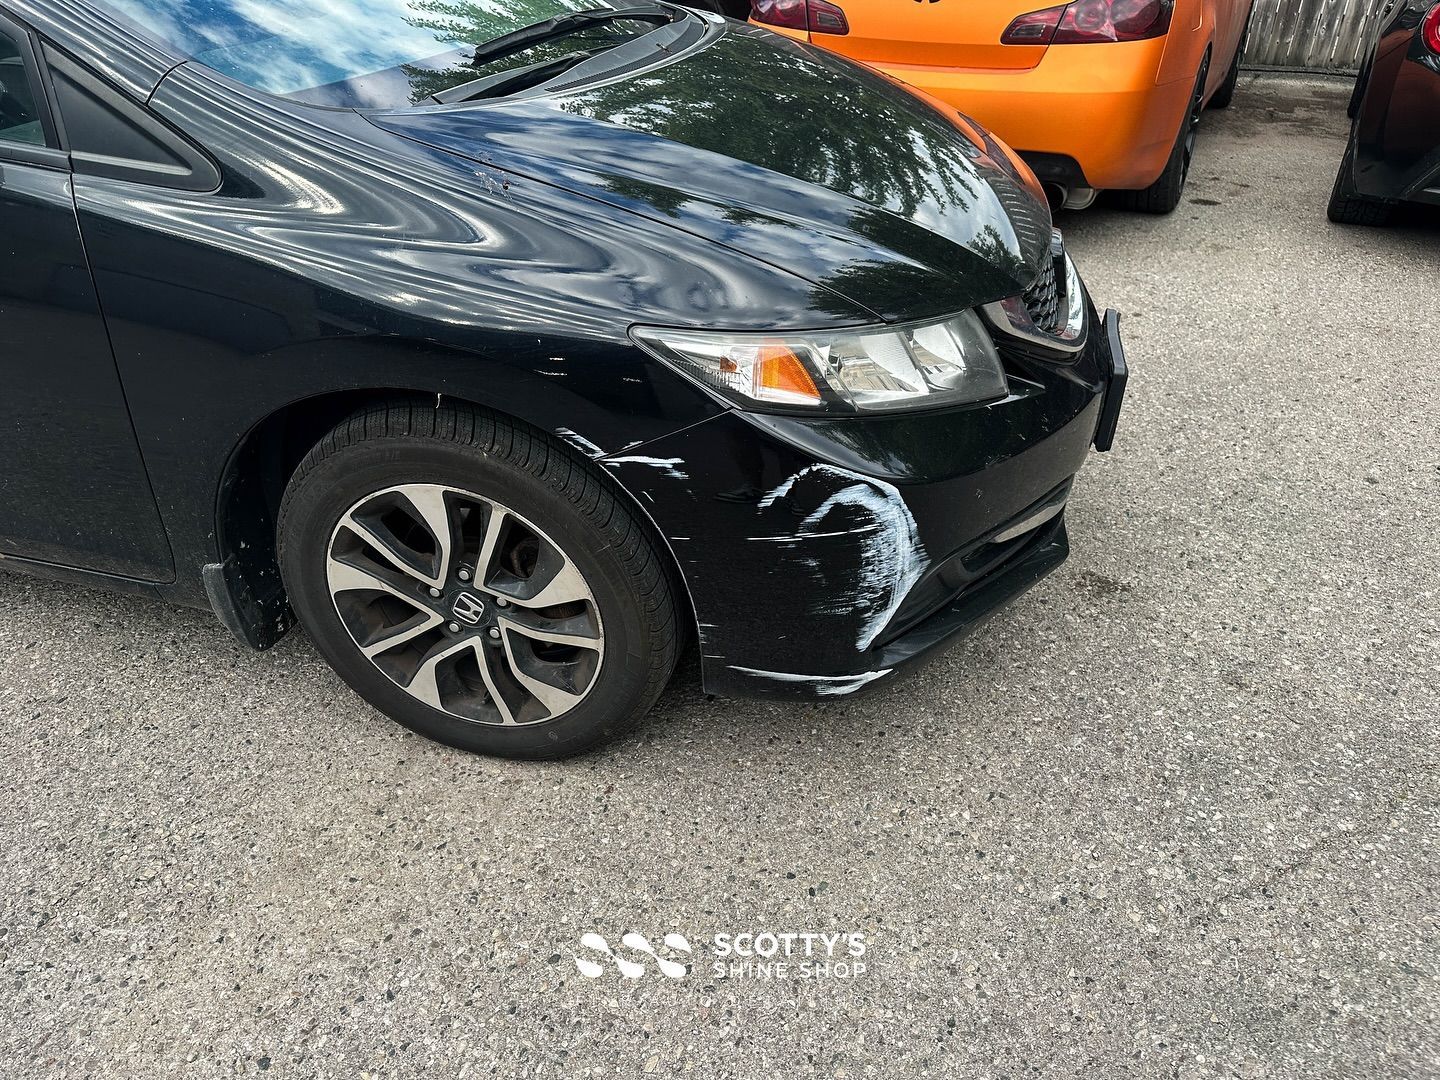 Honda Civic | Complete Auto Detailing Before and After | London, Ontario